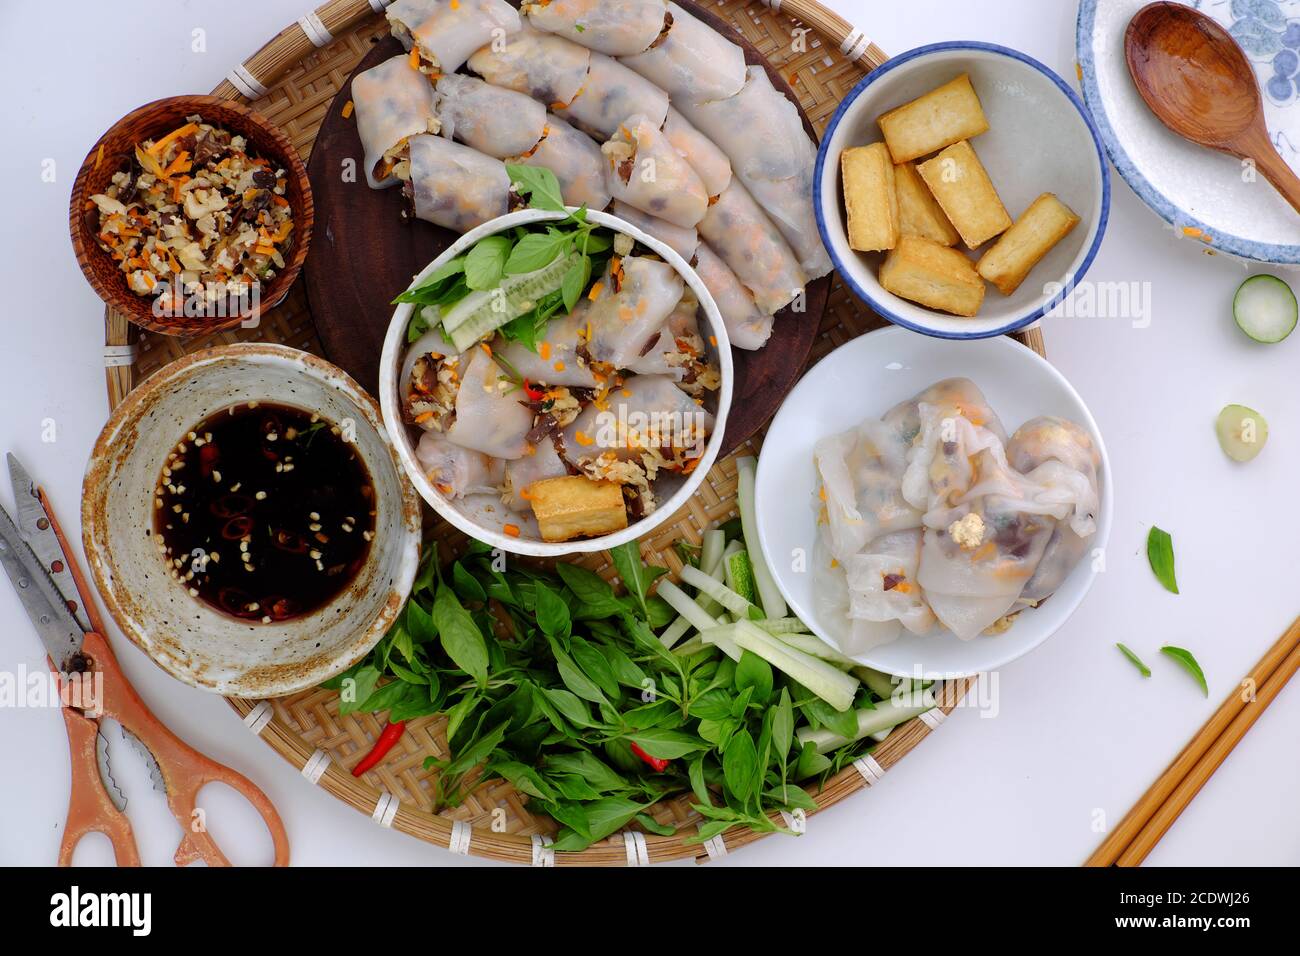 Top view tray of Vietnamese food ready to eat for breakfast, homemade vegan rice noodles roll from rice batter, wood ear mushroom, carrot, tofu Stock Photo